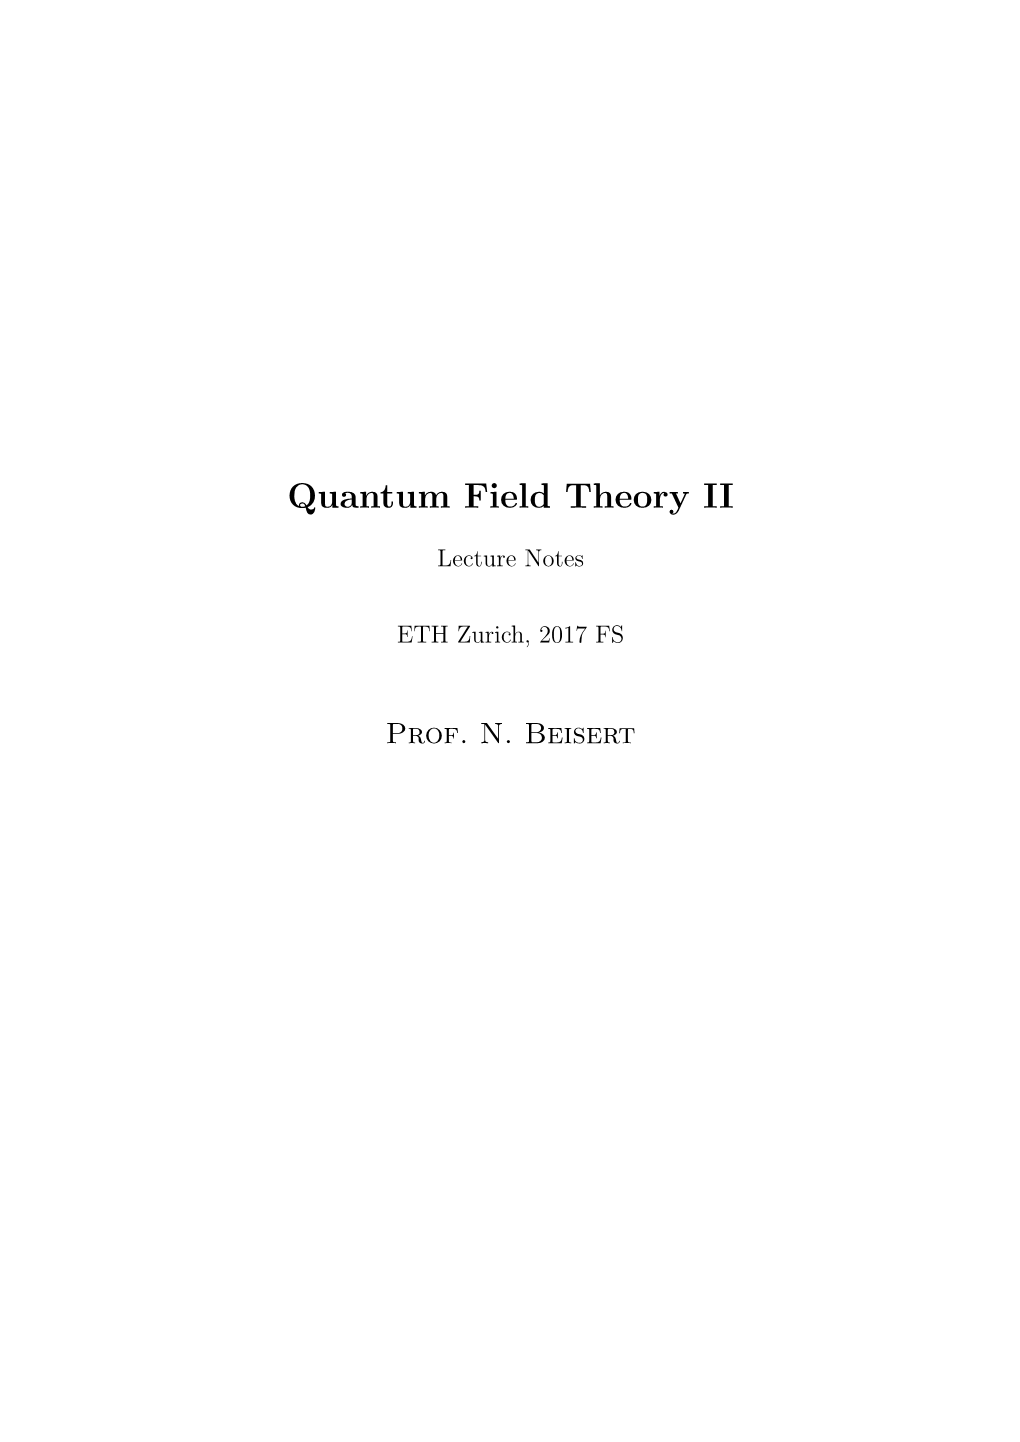 Quantum Field Theory II, Lecture Notes